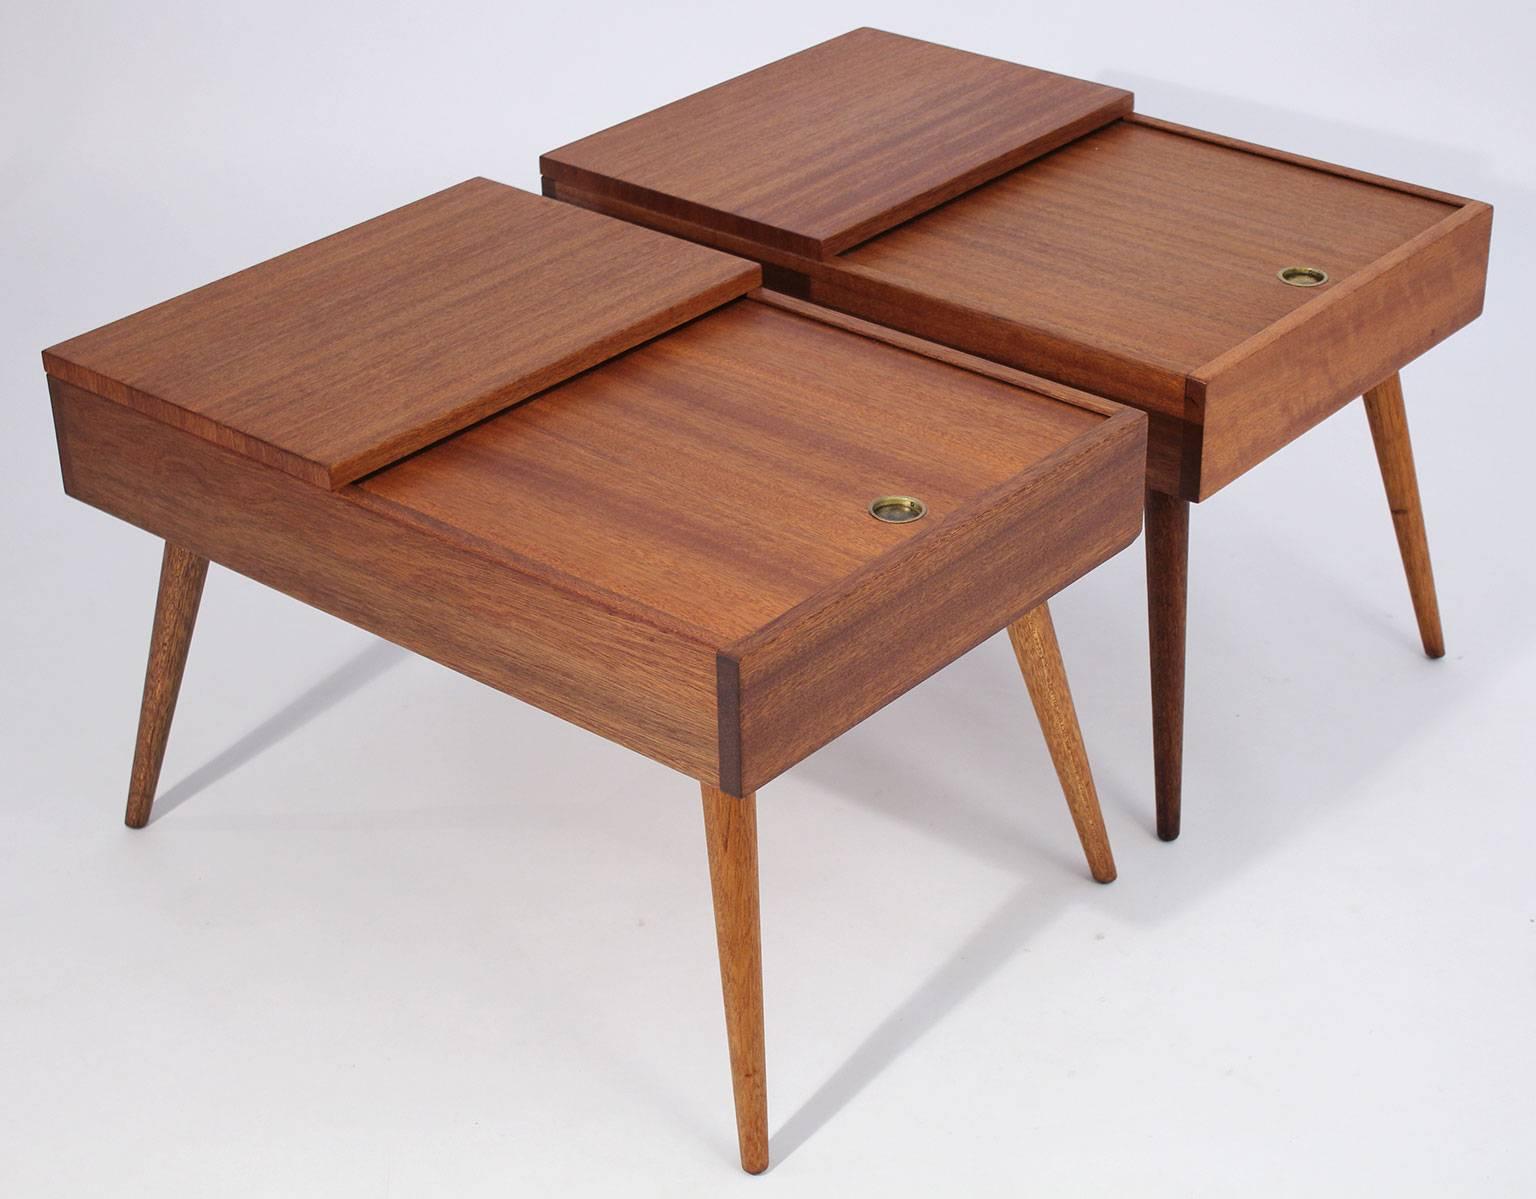 Early Brown Saltman end tables designed by John Keal, circa 1950s. Made of beautiful mahogany wood. Top drawer slides for storage. Wood is completely restored to original condition.